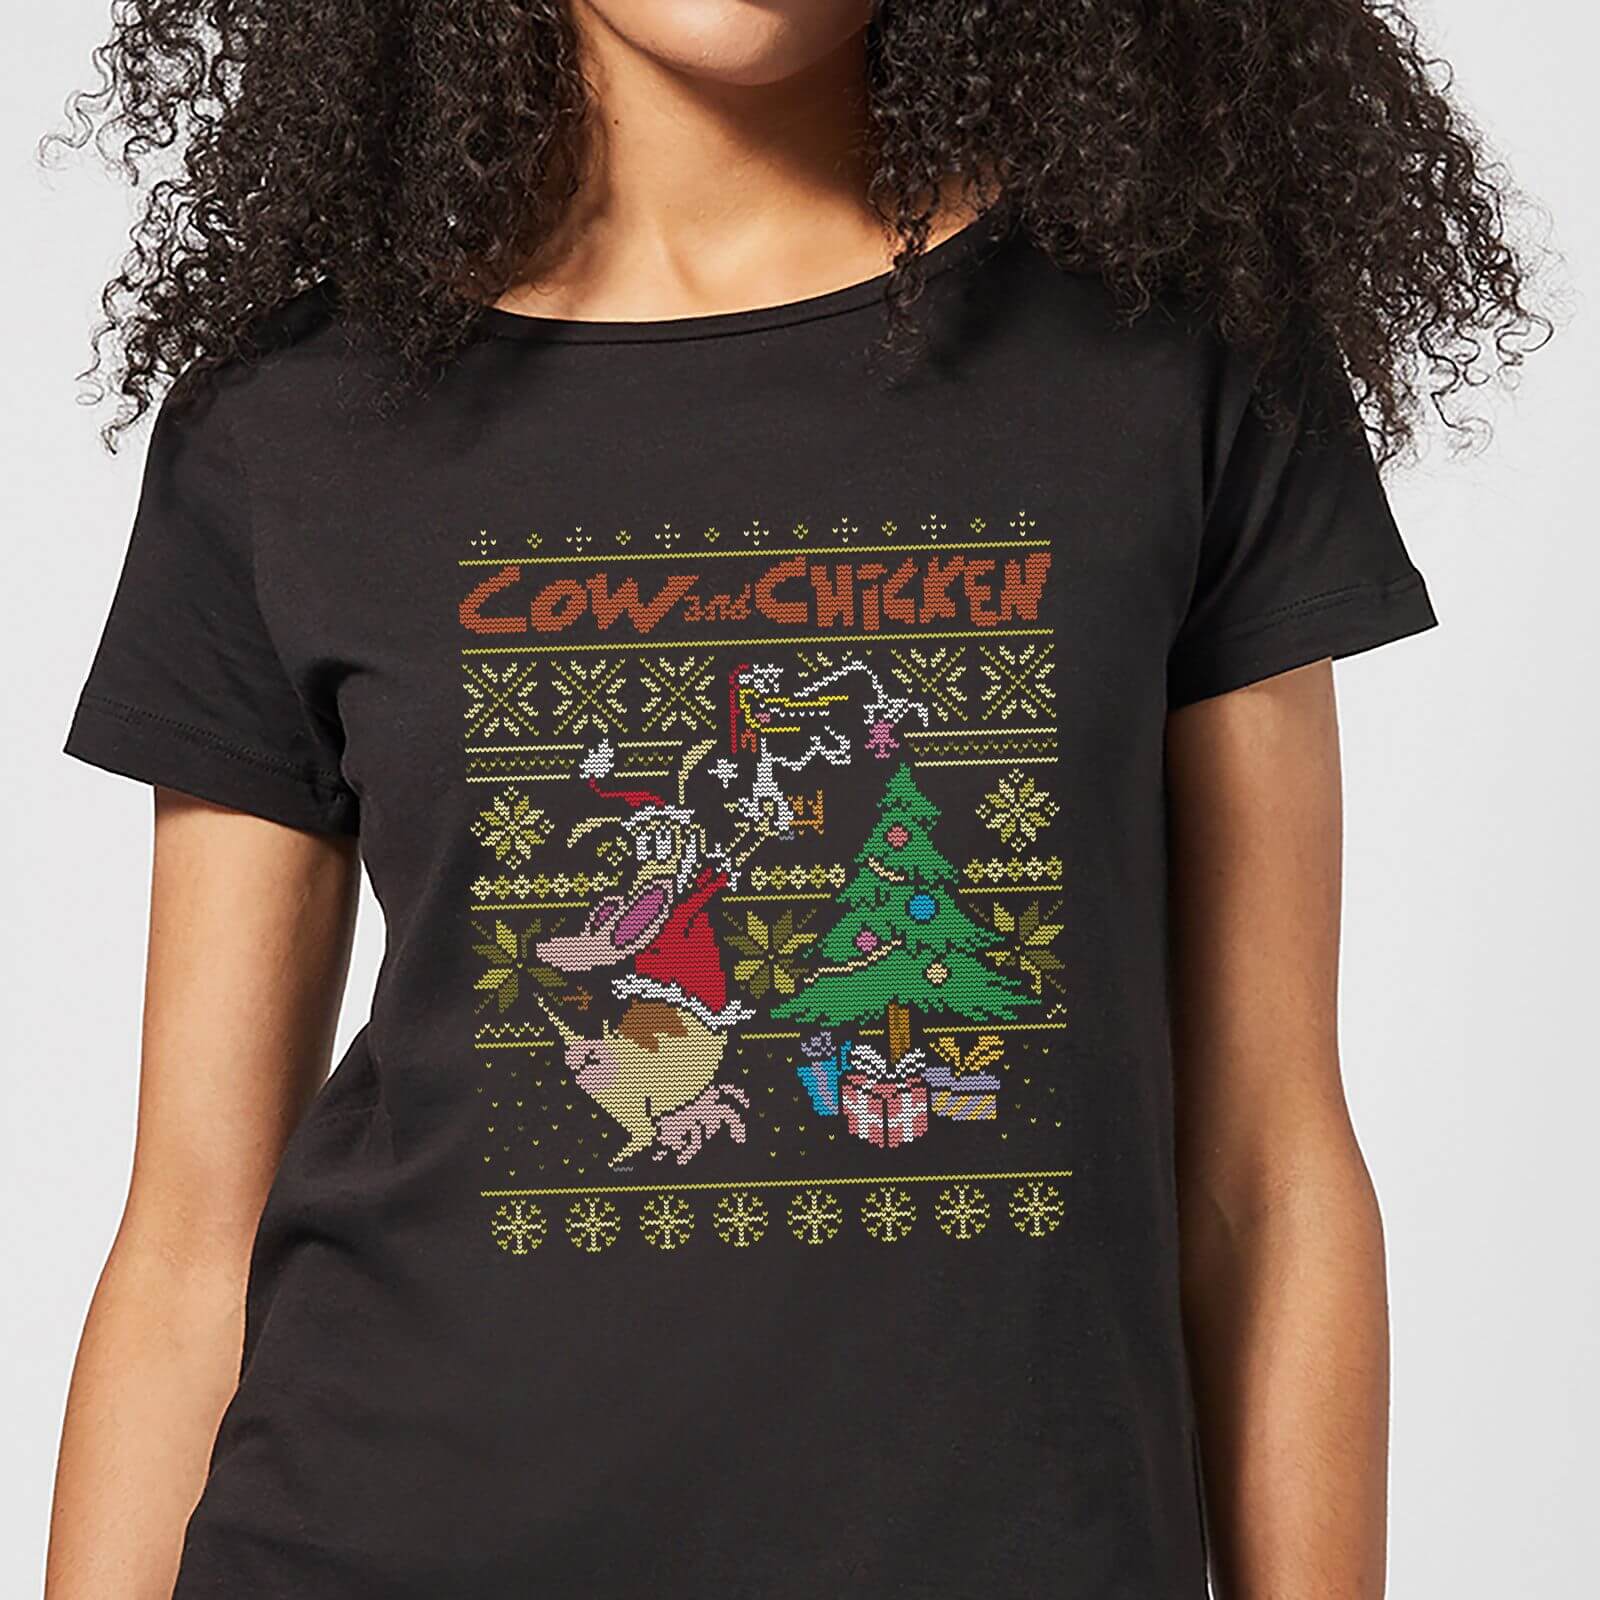 cartoon network cow and chicken cow and chicken pattern womens christmas t-shirt - black - m schwarz